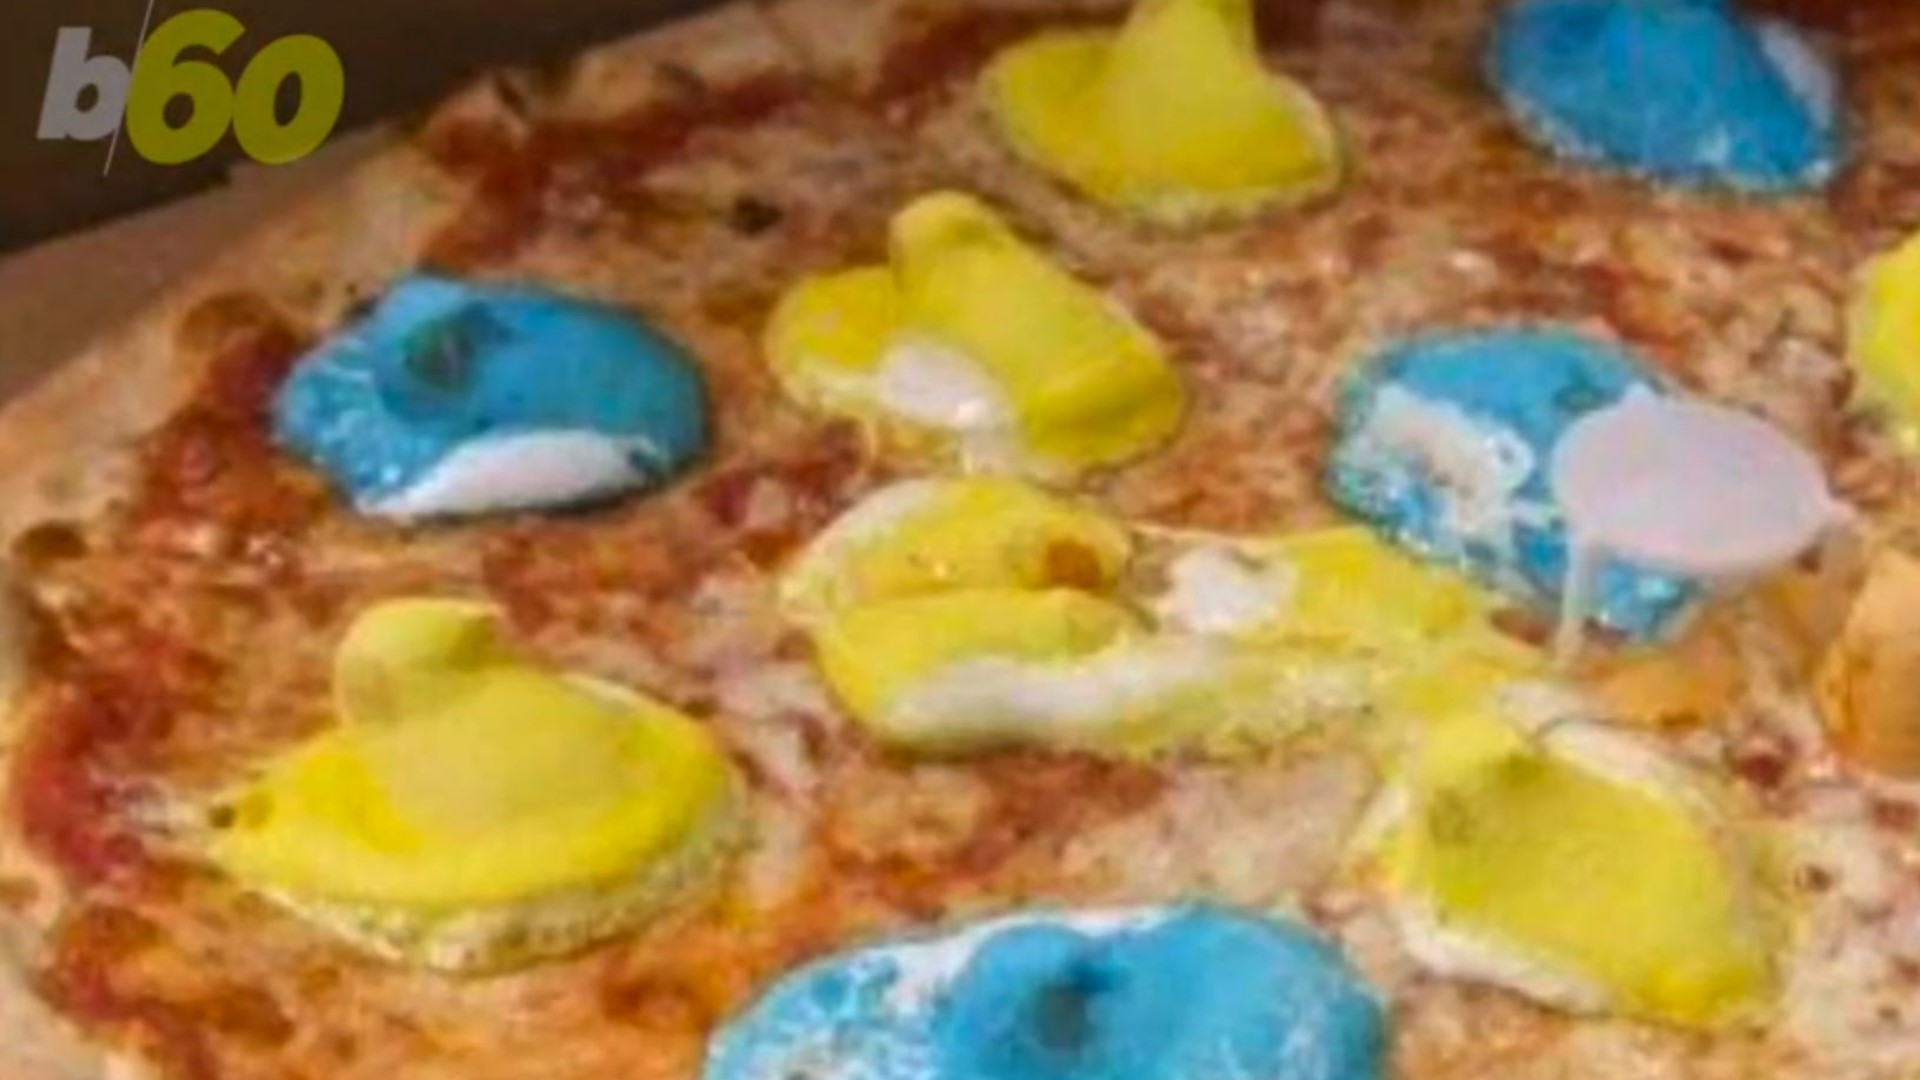 Peeps and pizza are two things that don't go together... and yet that's just what happened. Nathan Rousseau Smith (@fantasticmrnate) shows us.